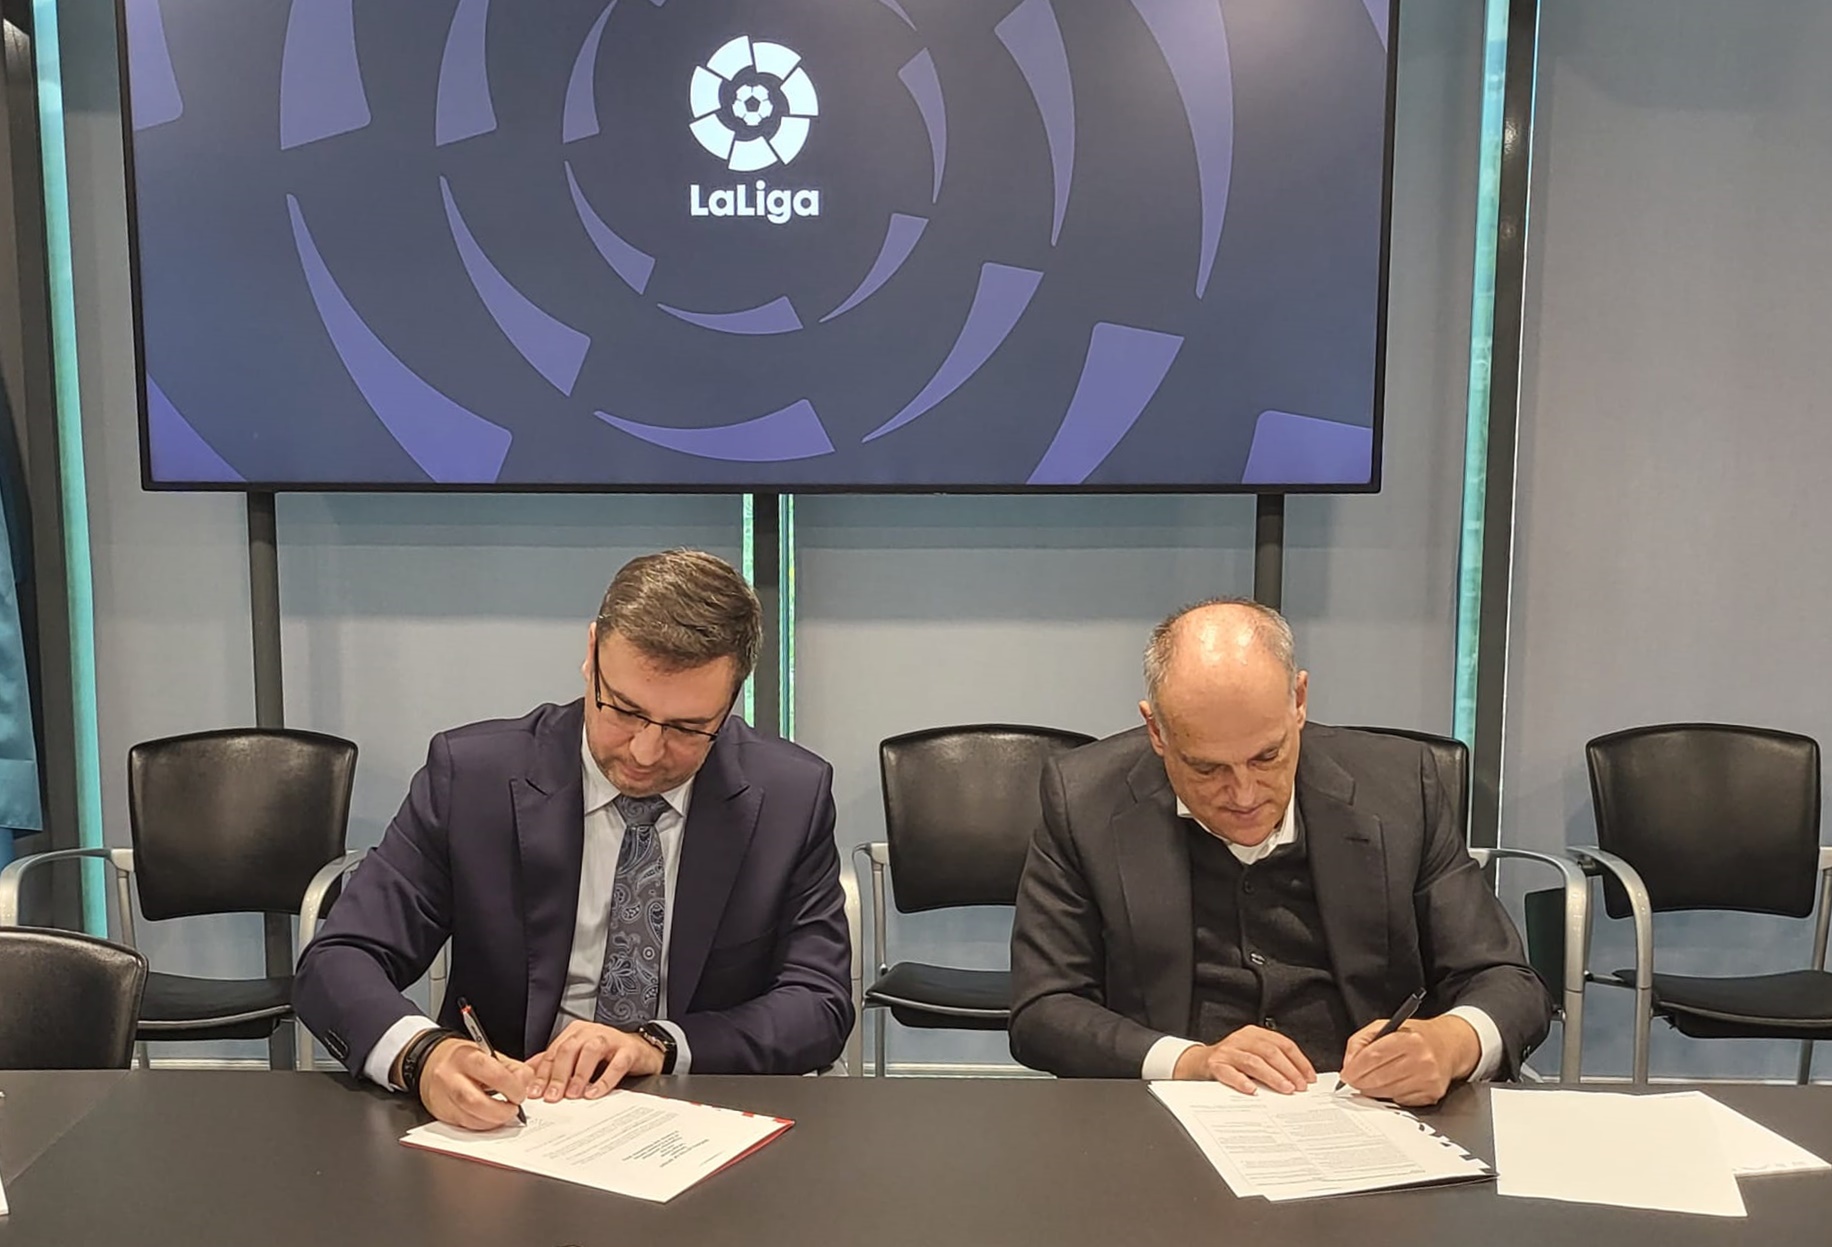 European Games officially supported by LaLiga!